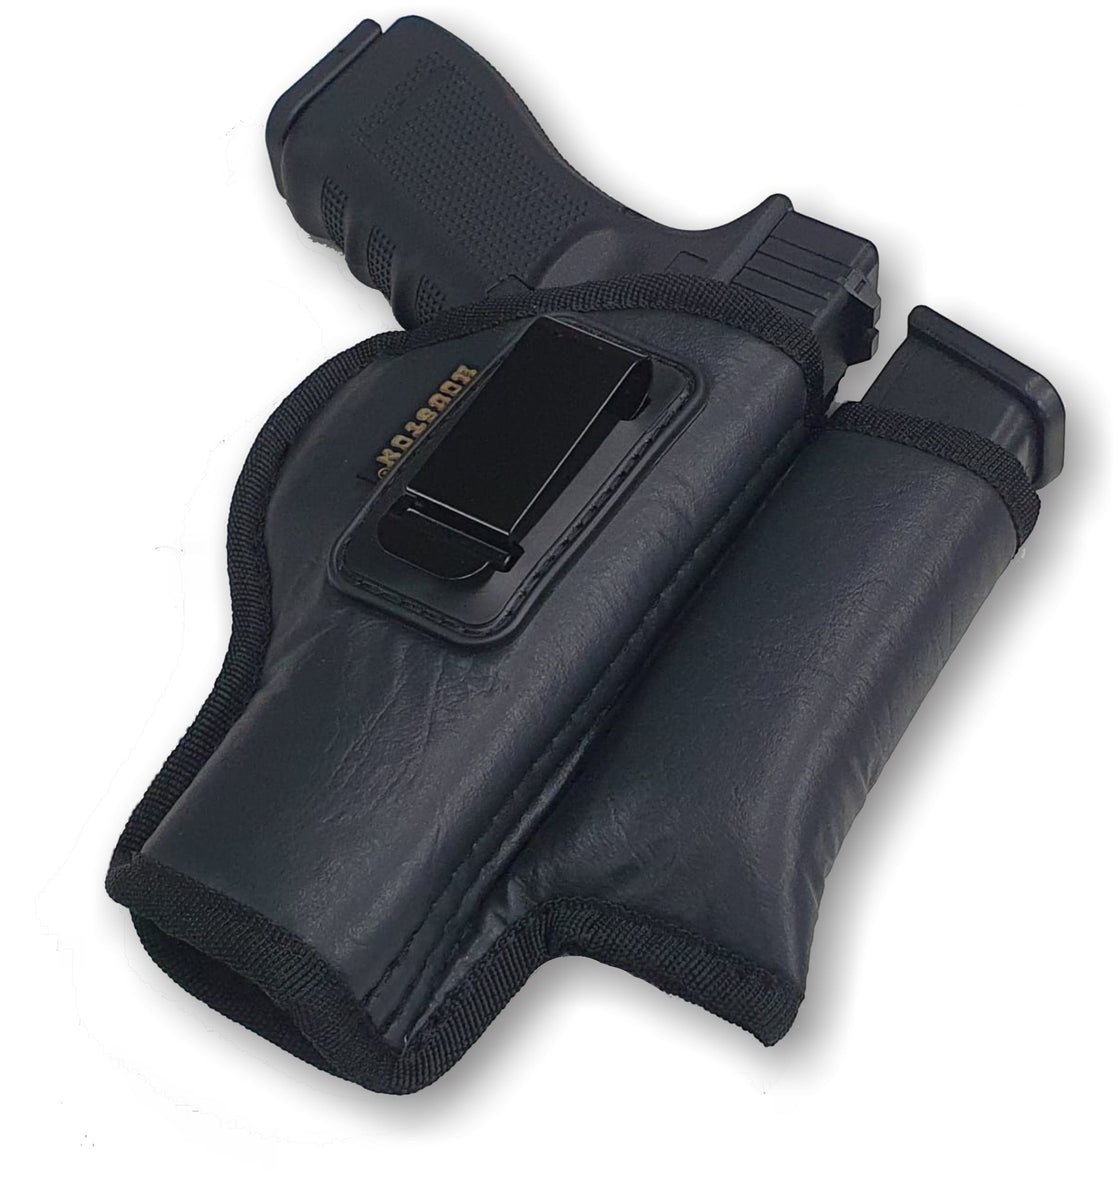 IWB Soft Houston Leather Holster with Magazine/Mag Pouch/Holder Choose Model 